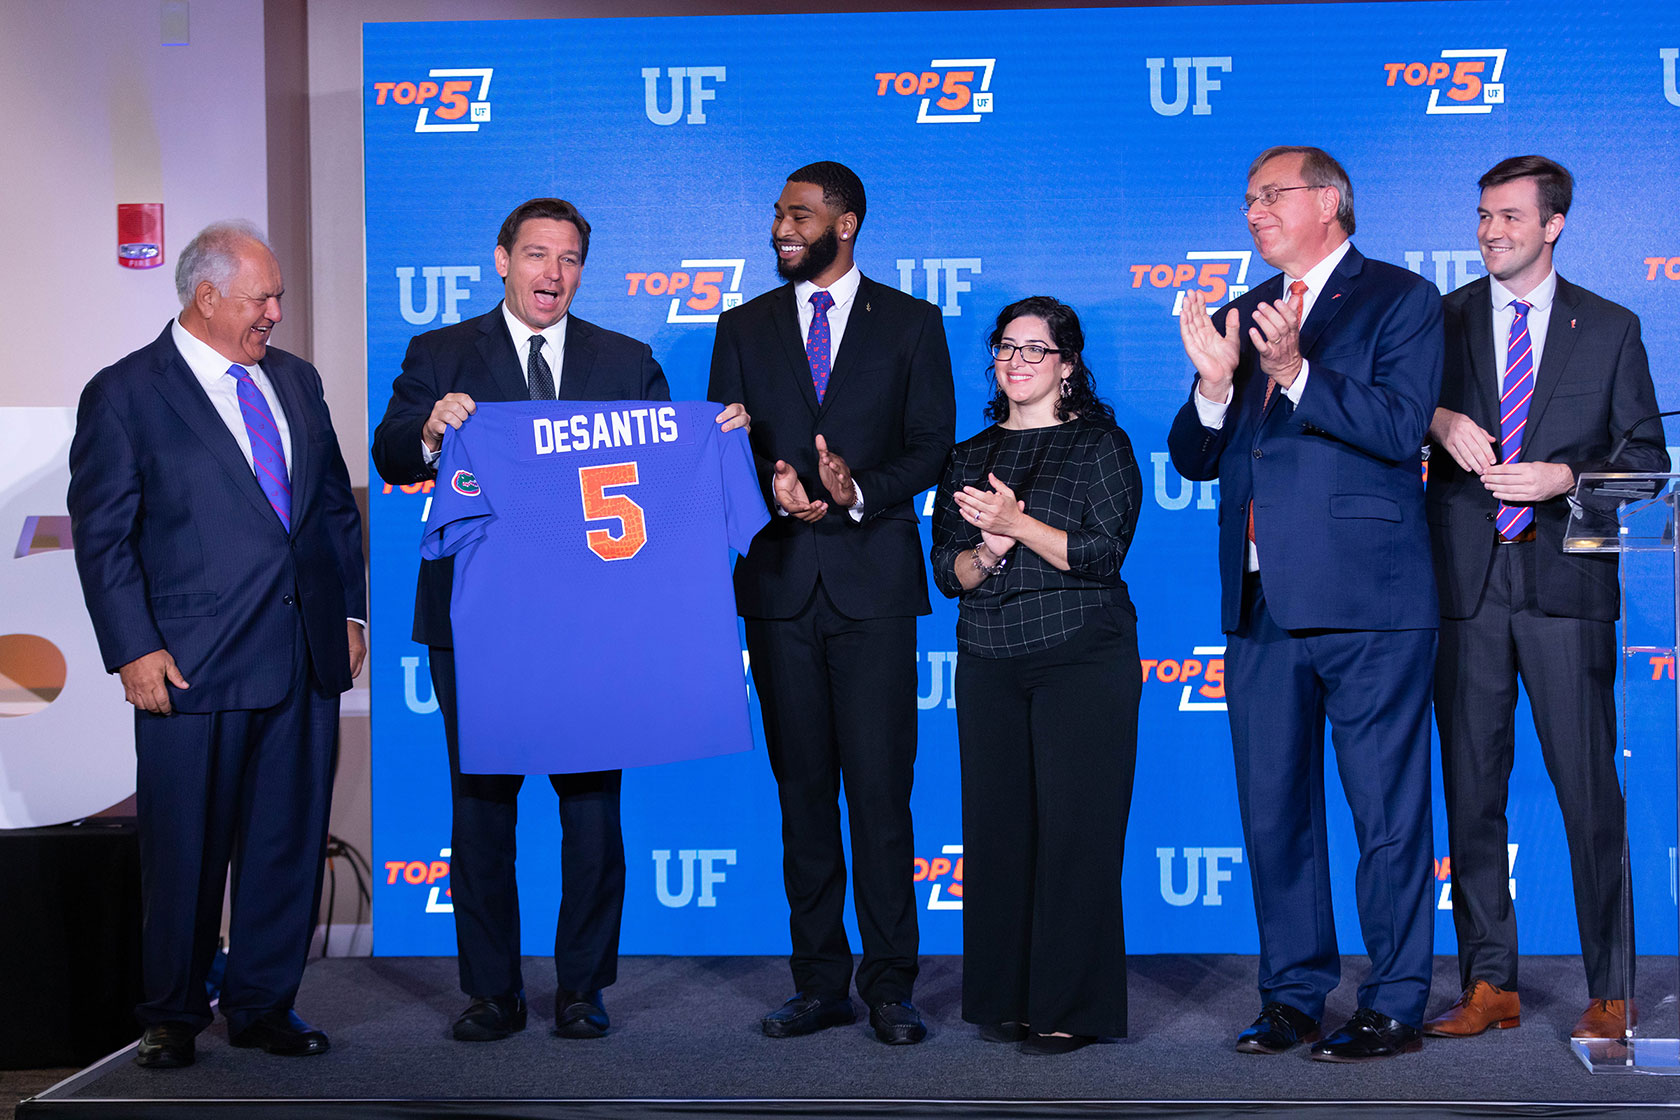 Florida Gov. Ron DeSantis is presented with a University of Florida jersey with the No. 5, representing the university's recent ranking as Top 5 among the country's public universities.